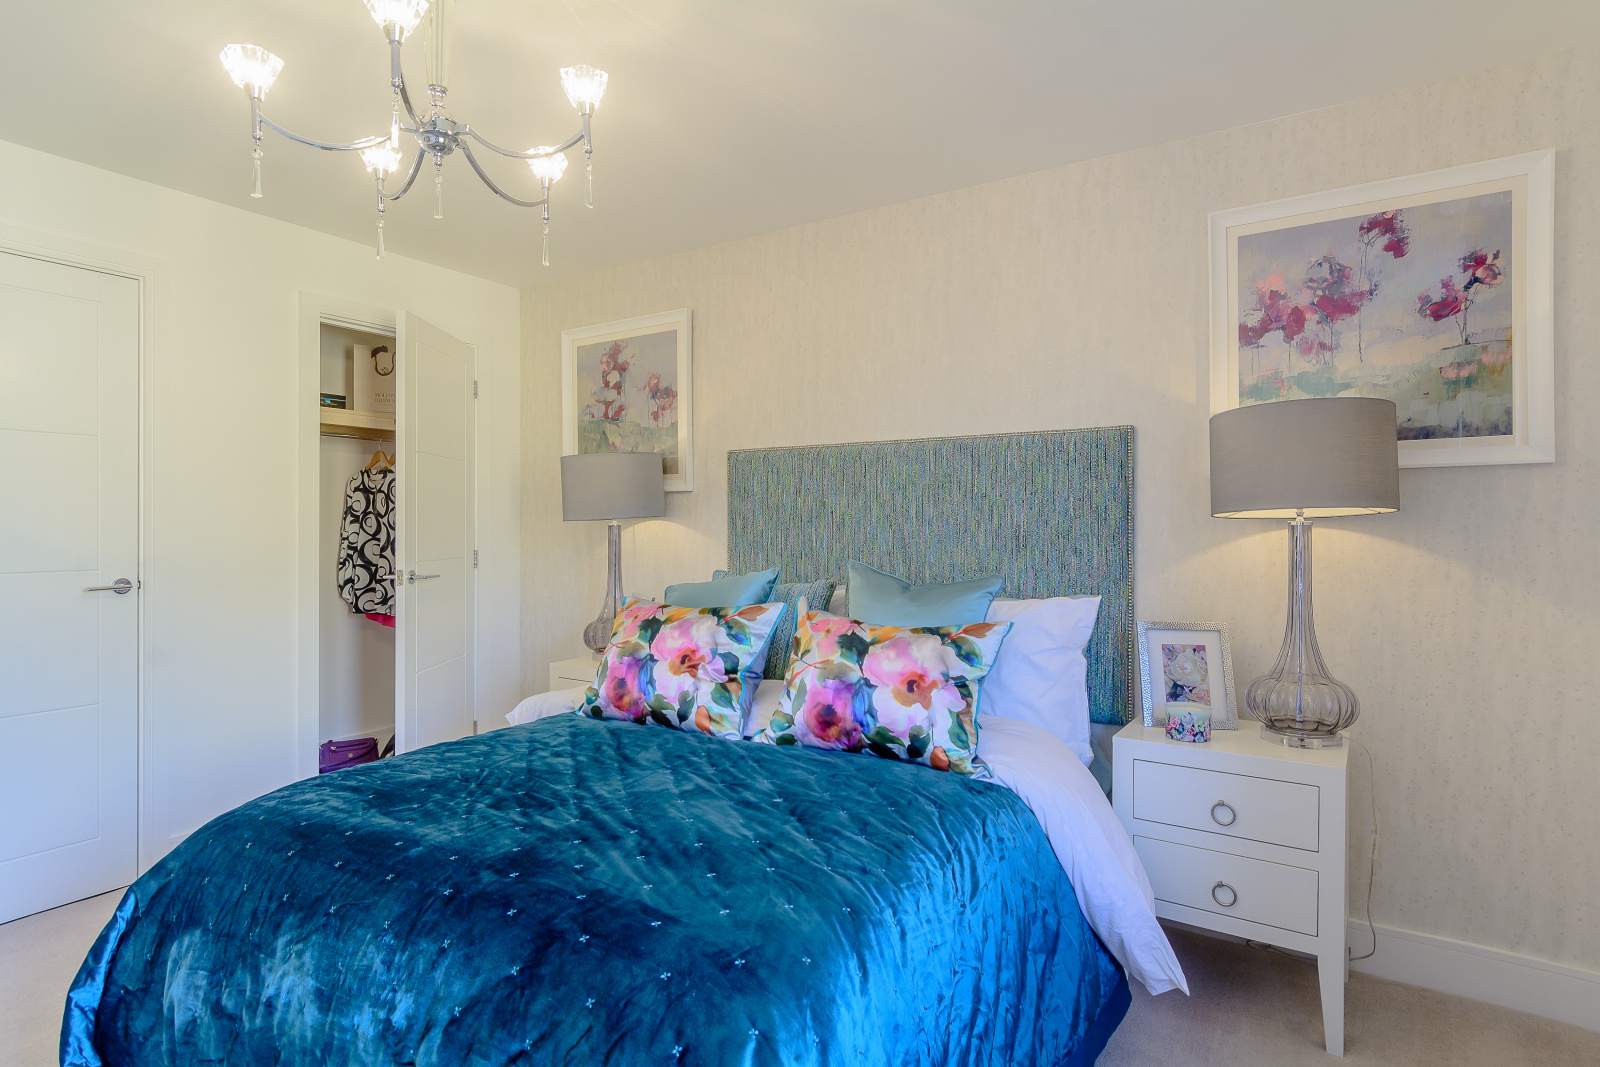 New homes in Bristol - The Hartpury